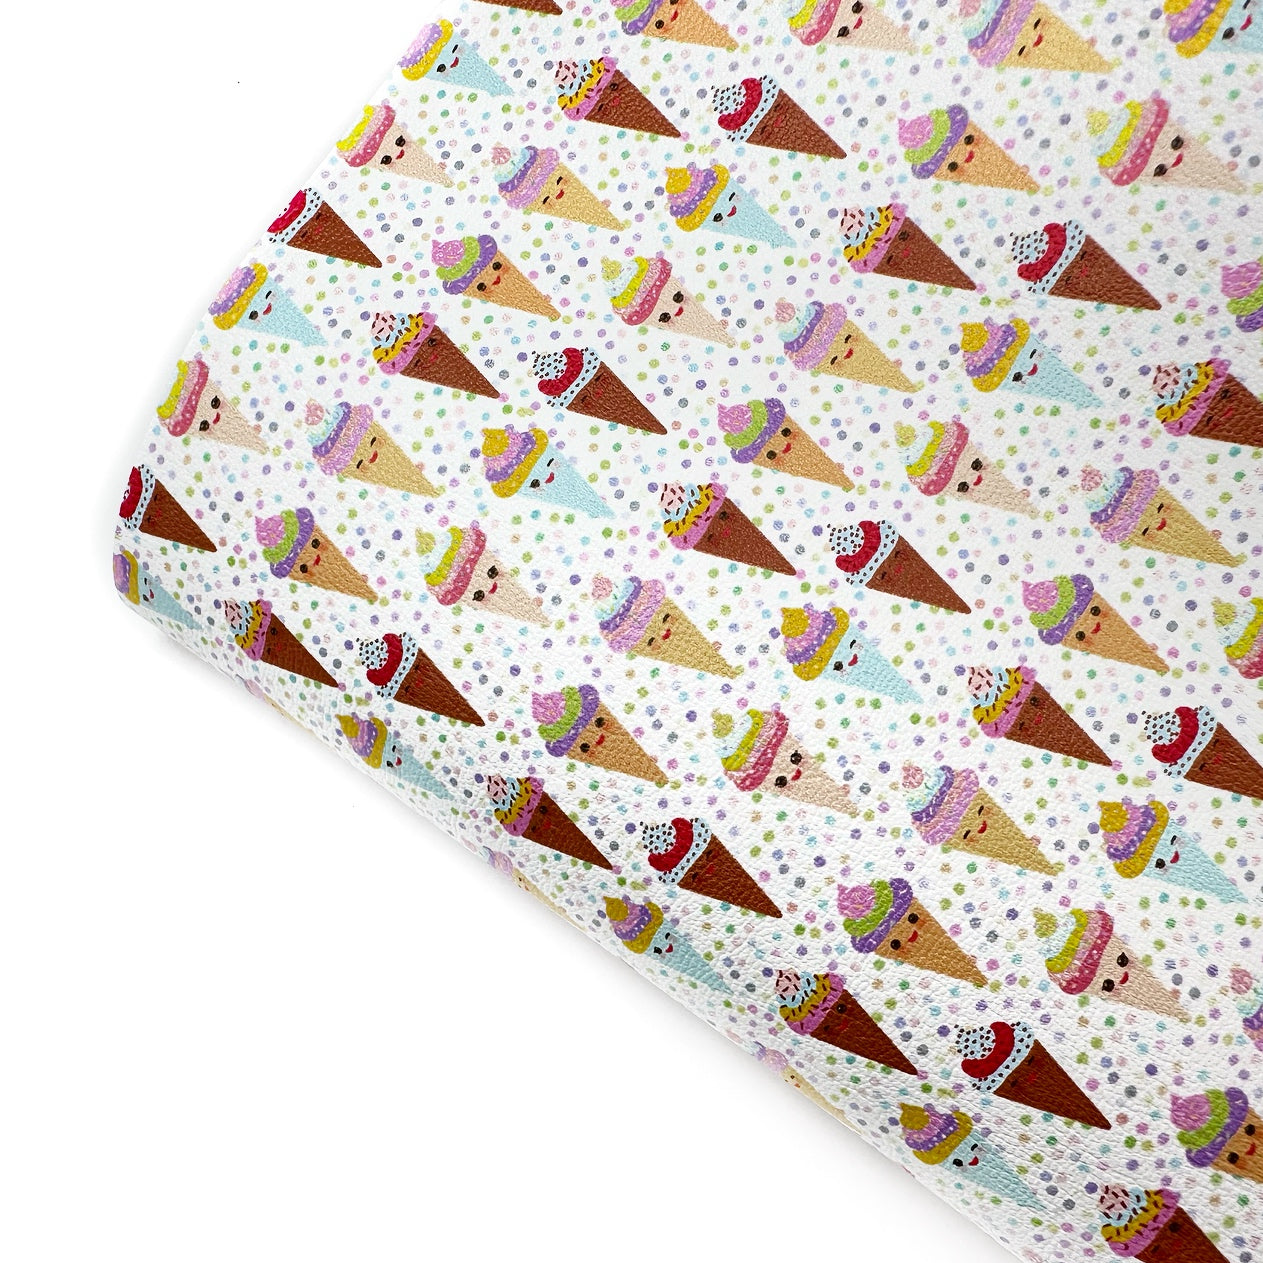 Cute Kawaii Sprinkle Cones Premium Faux Leather Fabric Sheets